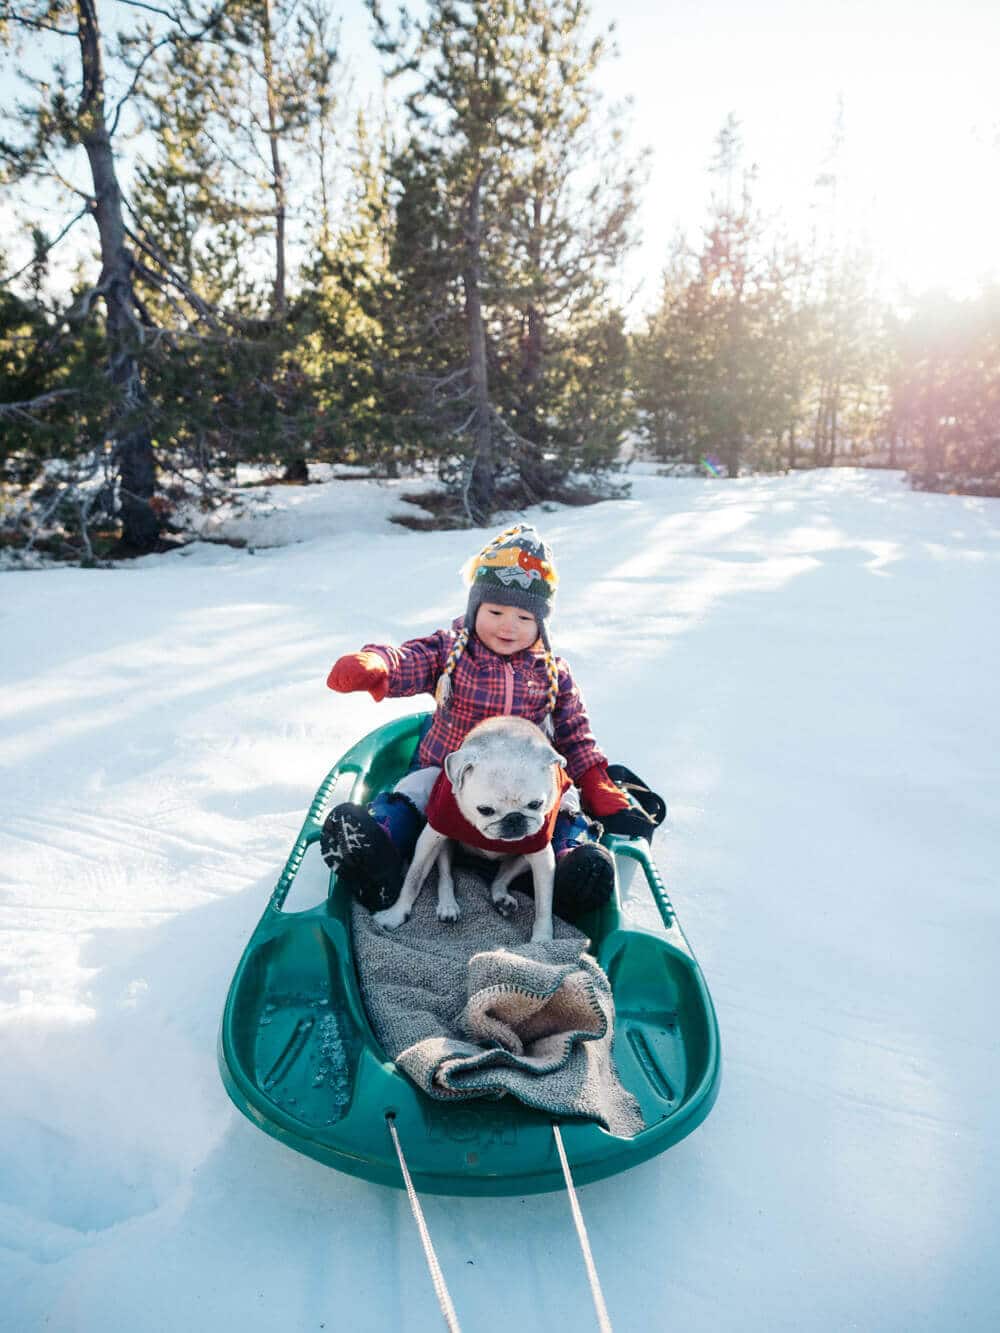 Taking the kids out for a spin on the sled